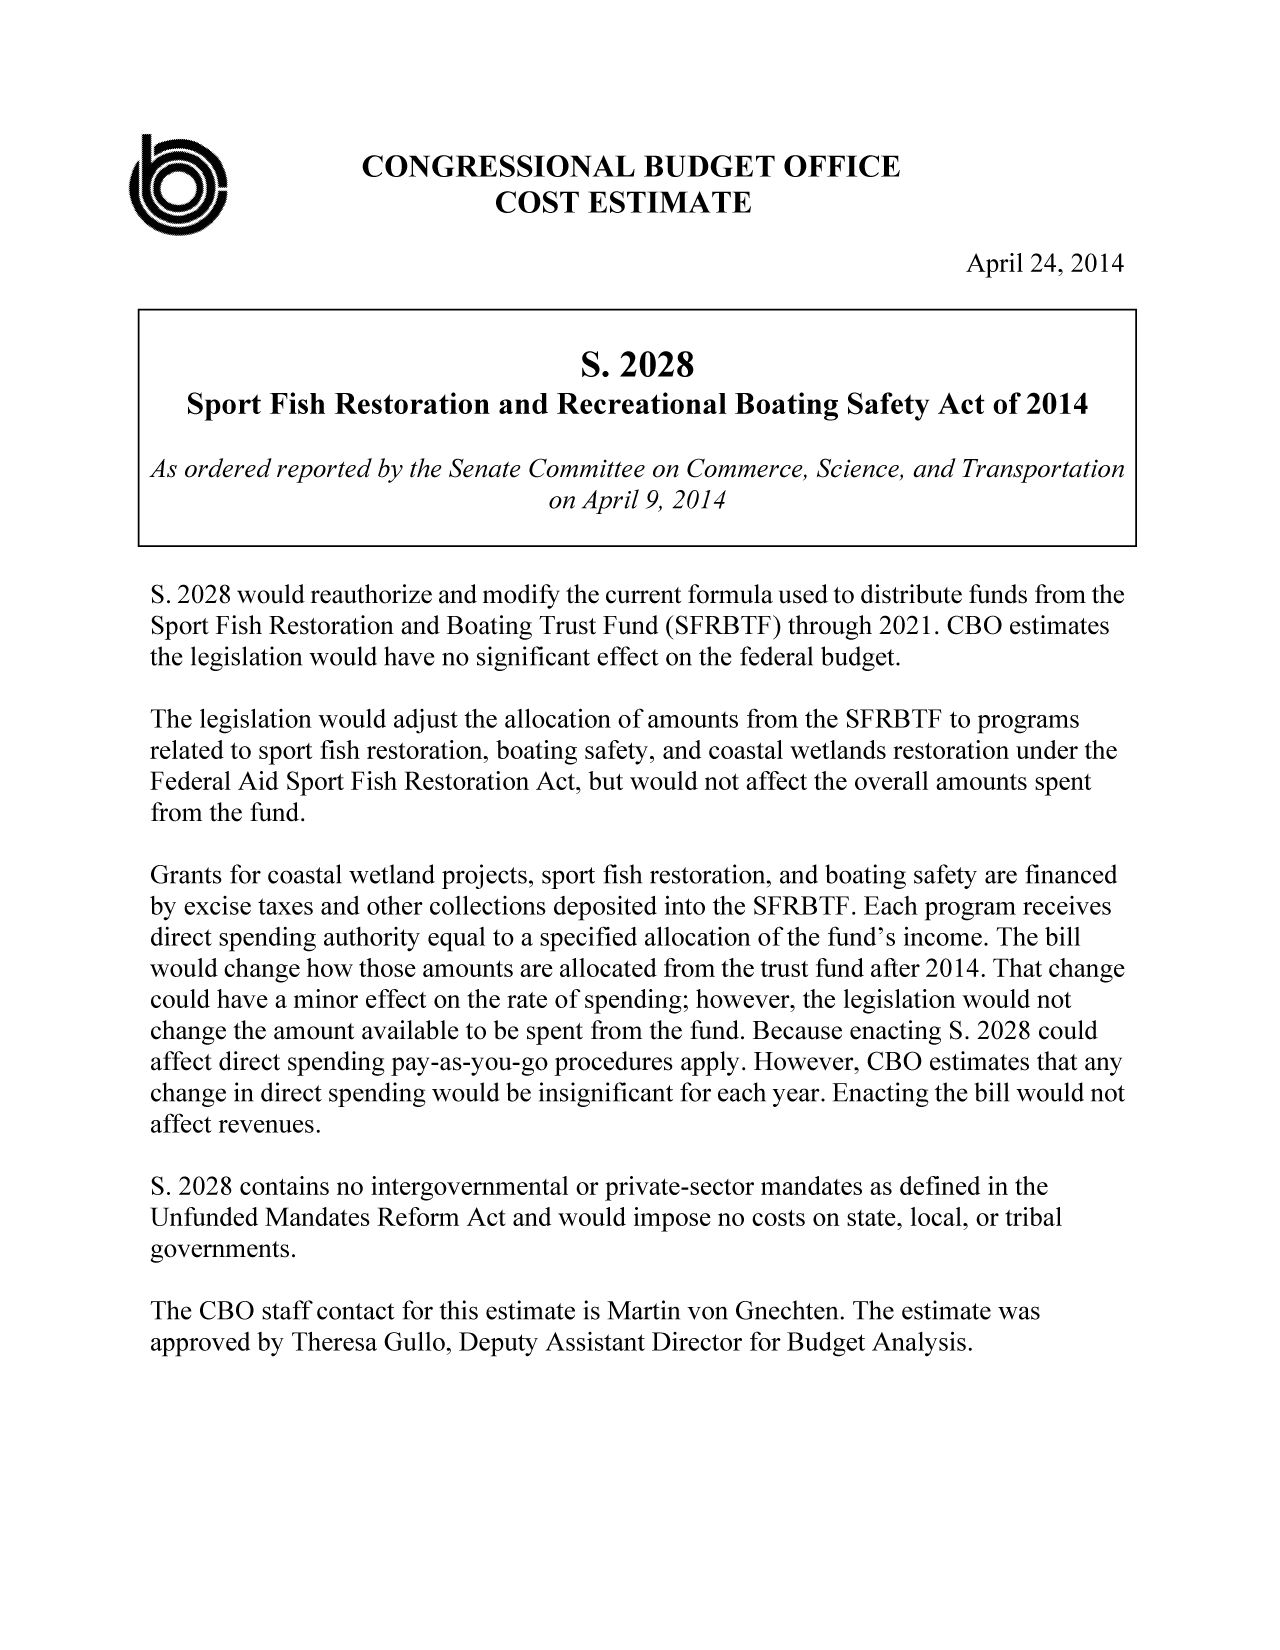 handle is hein.congrec/cbo1590 and id is 1 raw text is: CONGRESSIONAL BUDGET OFFICE
COST ESTIMATE
April 24, 2014
S. 2028
Sport Fish Restoration and Recreational Boating Safety Act of 2014
As ordered reported by the Senate Committee on Commerce, Science, and Transportation
on April 9, 2014
S. 2028 would reauthorize and modify the current formula used to distribute funds from the
Sport Fish Restoration and Boating Trust Fund (SFRBTF) through 2021. CBO estimates
the legislation would have no significant effect on the federal budget.
The legislation would adjust the allocation of amounts from the SFRBTF to programs
related to sport fish restoration, boating safety, and coastal wetlands restoration under the
Federal Aid Sport Fish Restoration Act, but would not affect the overall amounts spent
from the fund.
Grants for coastal wetland projects, sport fish restoration, and boating safety are financed
by excise taxes and other collections deposited into the SFRBTF. Each program receives
direct spending authority equal to a specified allocation of the fund's income. The bill
would change how those amounts are allocated from the trust fund after 2014. That change
could have a minor effect on the rate of spending; however, the legislation would not
change the amount available to be spent from the fund. Because enacting S. 2028 could
affect direct spending pay-as-you-go procedures apply. However, CBO estimates that any
change in direct spending would be insignificant for each year. Enacting the bill would not
affect revenues.
S. 2028 contains no intergovernmental or private-sector mandates as defined in the
Unfunded Mandates Reform Act and would impose no costs on state, local, or tribal
governments.
The CBO staff contact for this estimate is Martin von Gnechten. The estimate was
approved by Theresa Gullo, Deputy Assistant Director for Budget Analysis.


